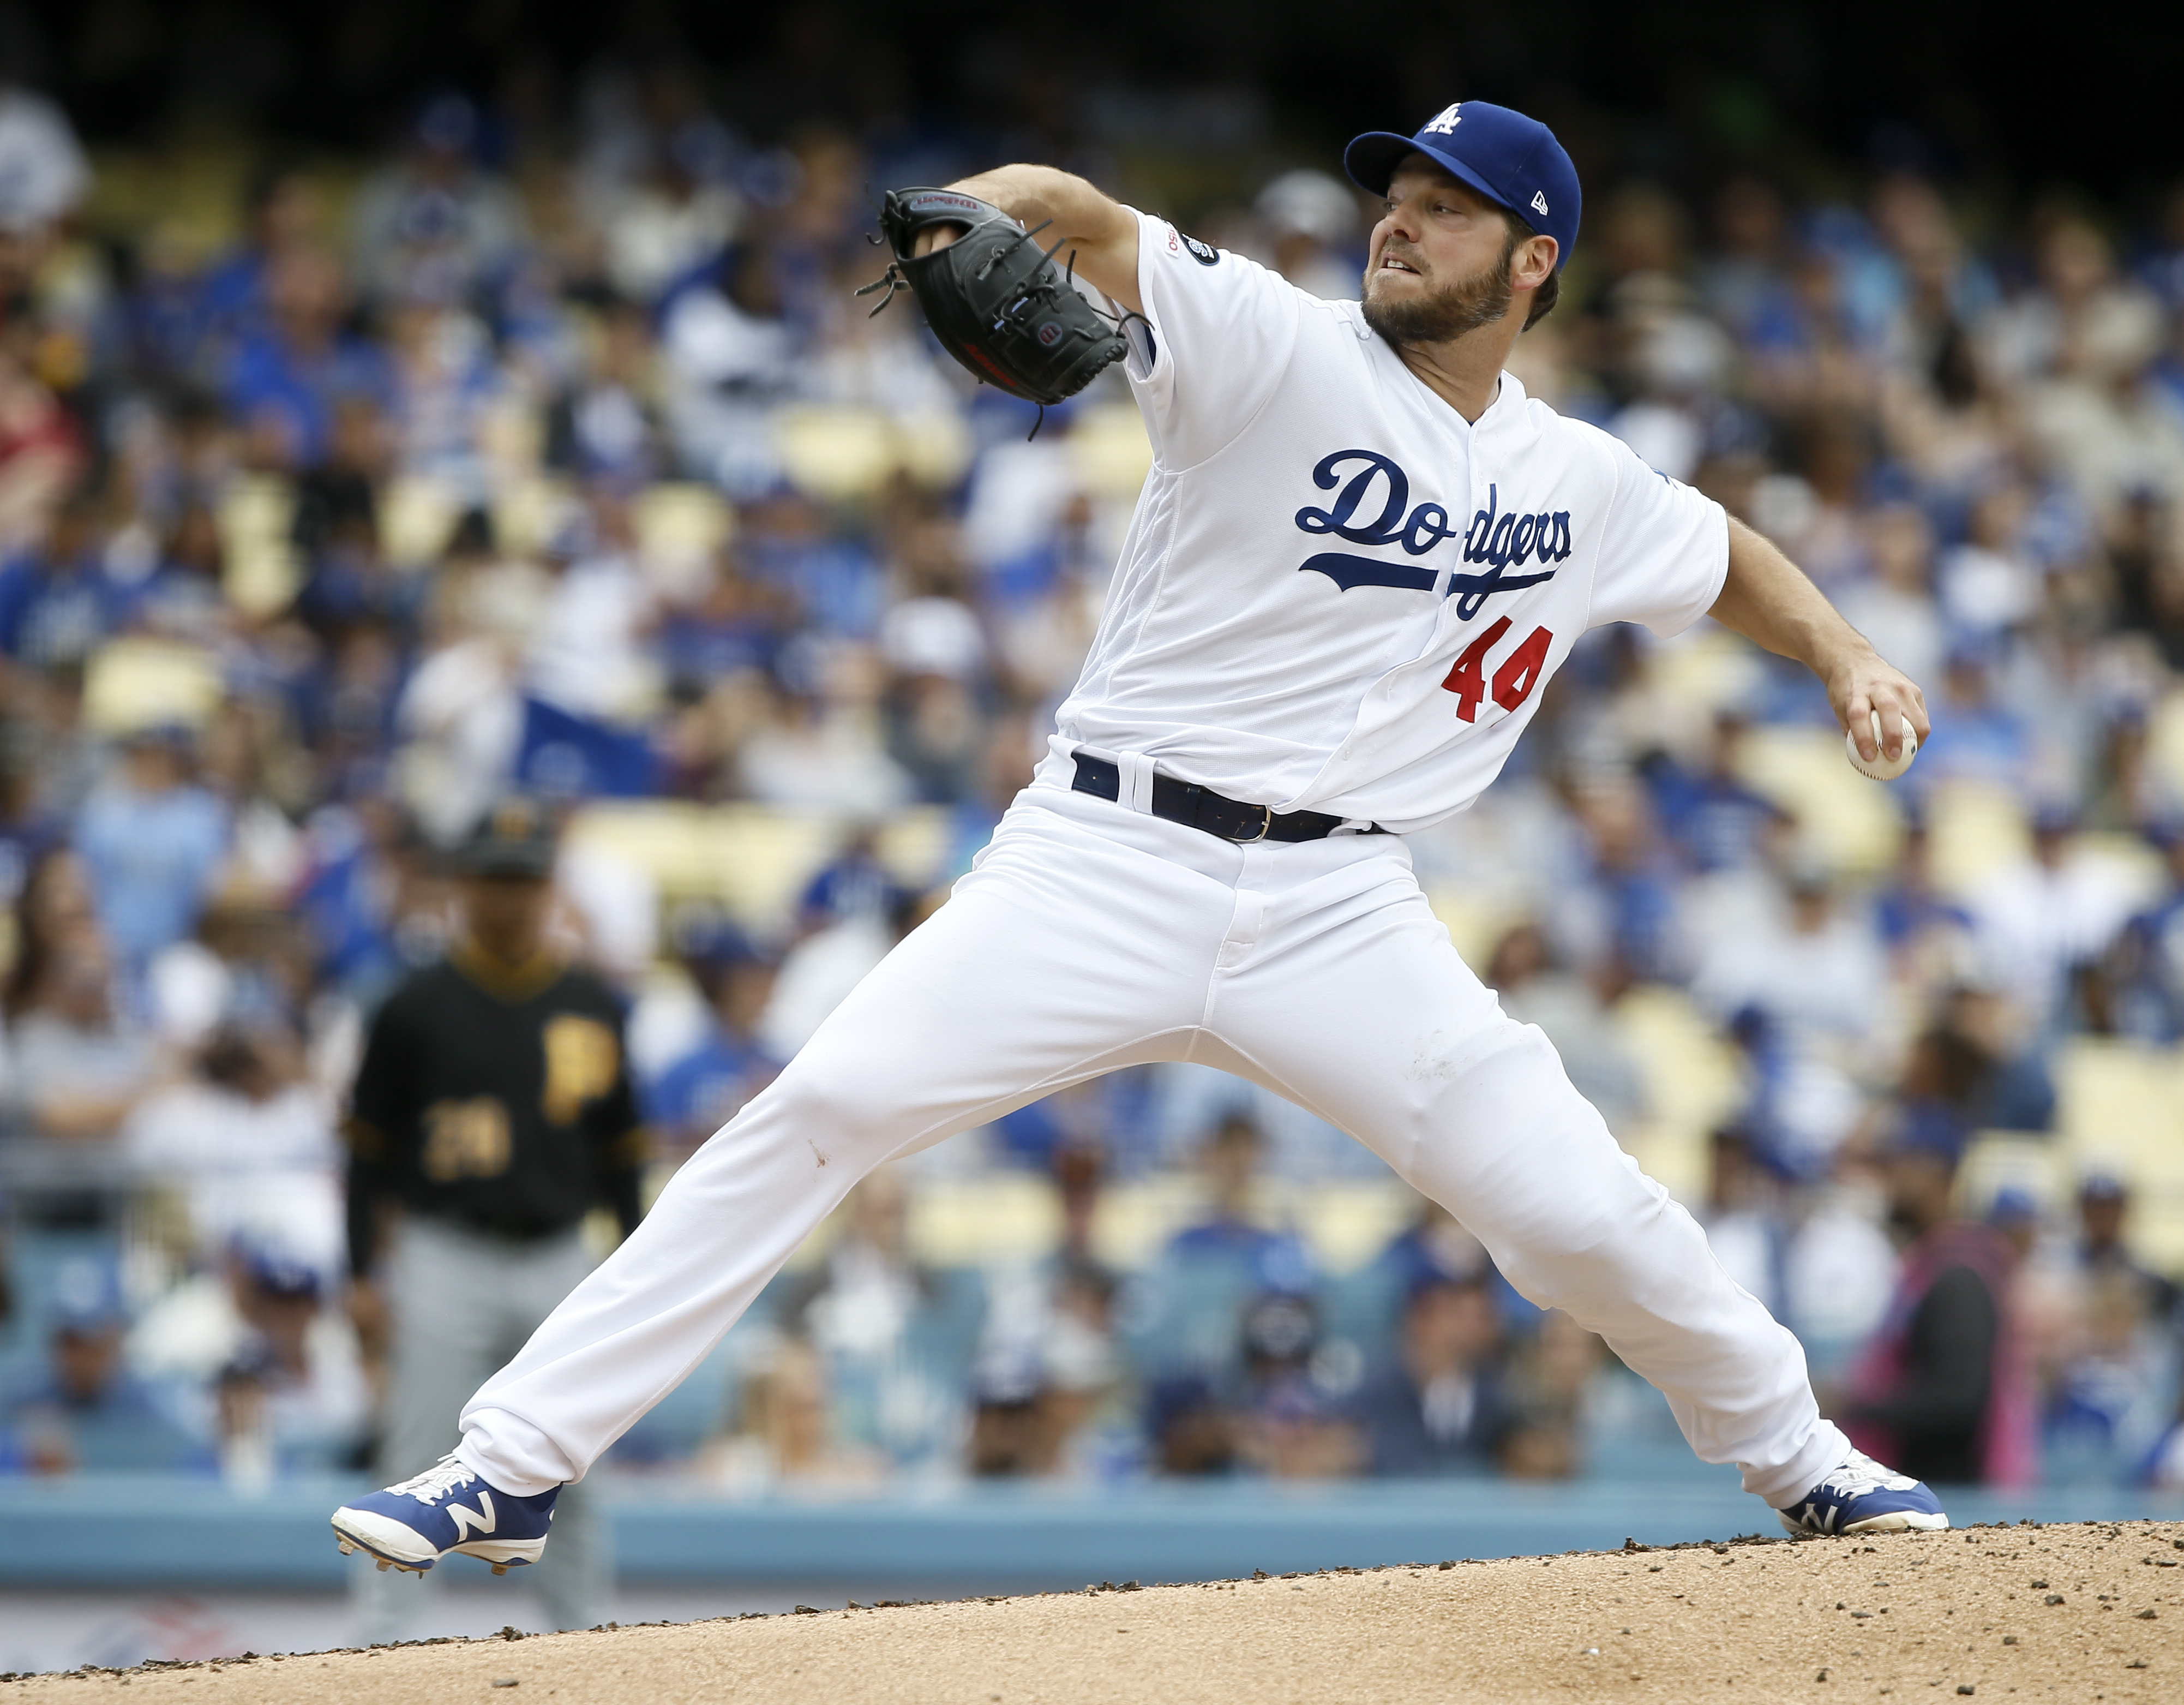 Muncy, Bellinger lead Dodgers to 7-6 win, sweep of Pirates